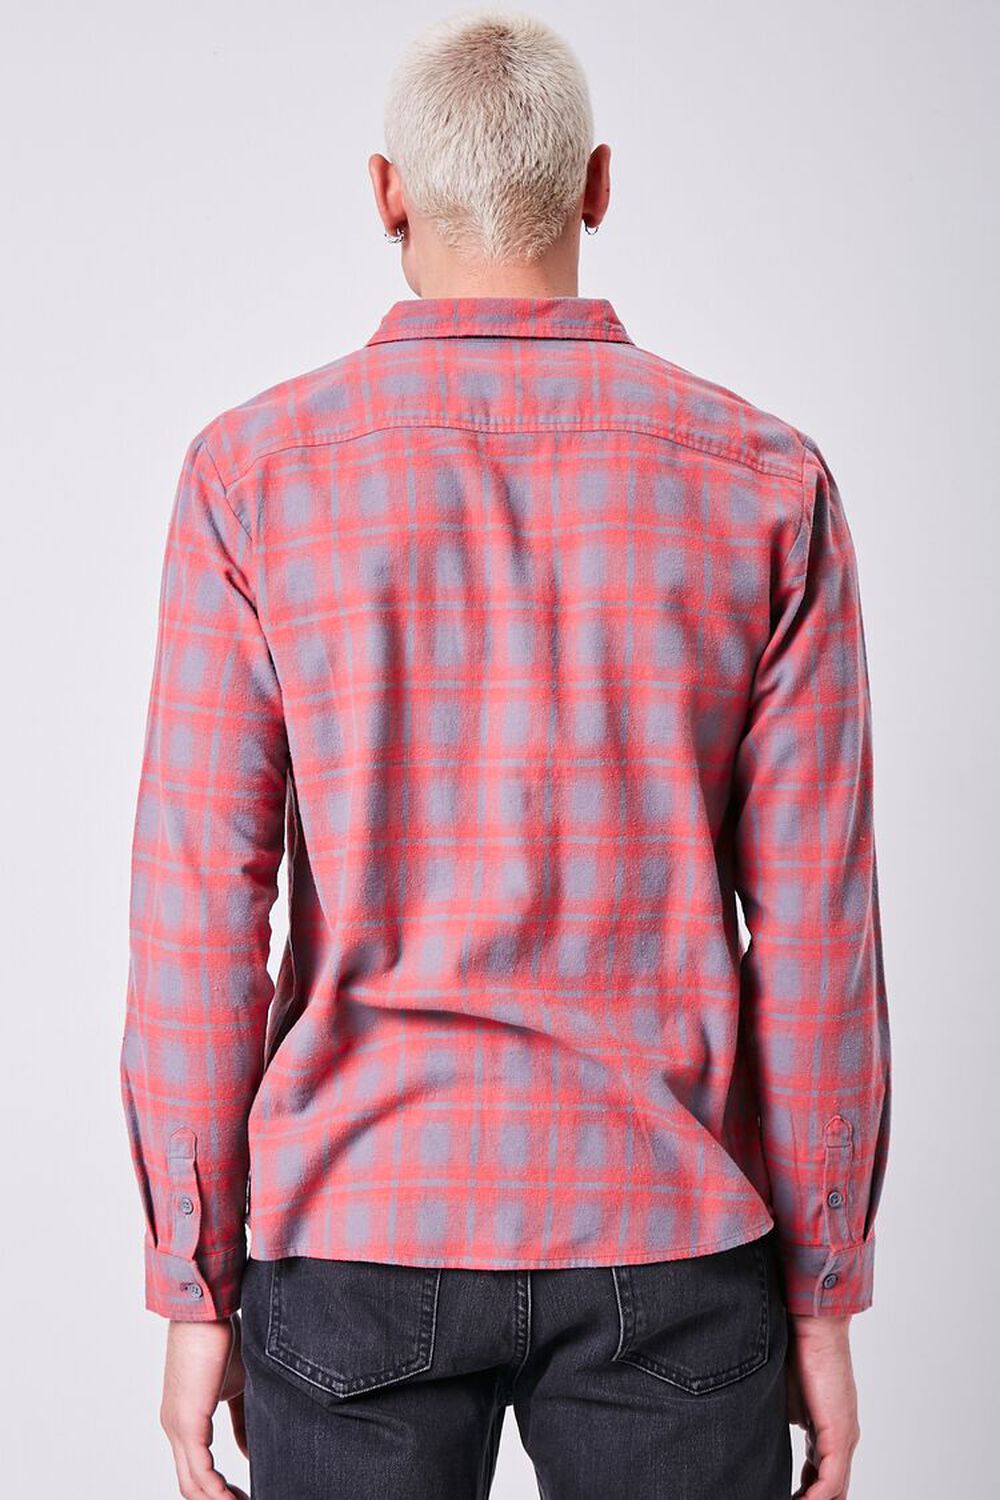 RED/GREY Plaid Button-Front Shirt, image 3